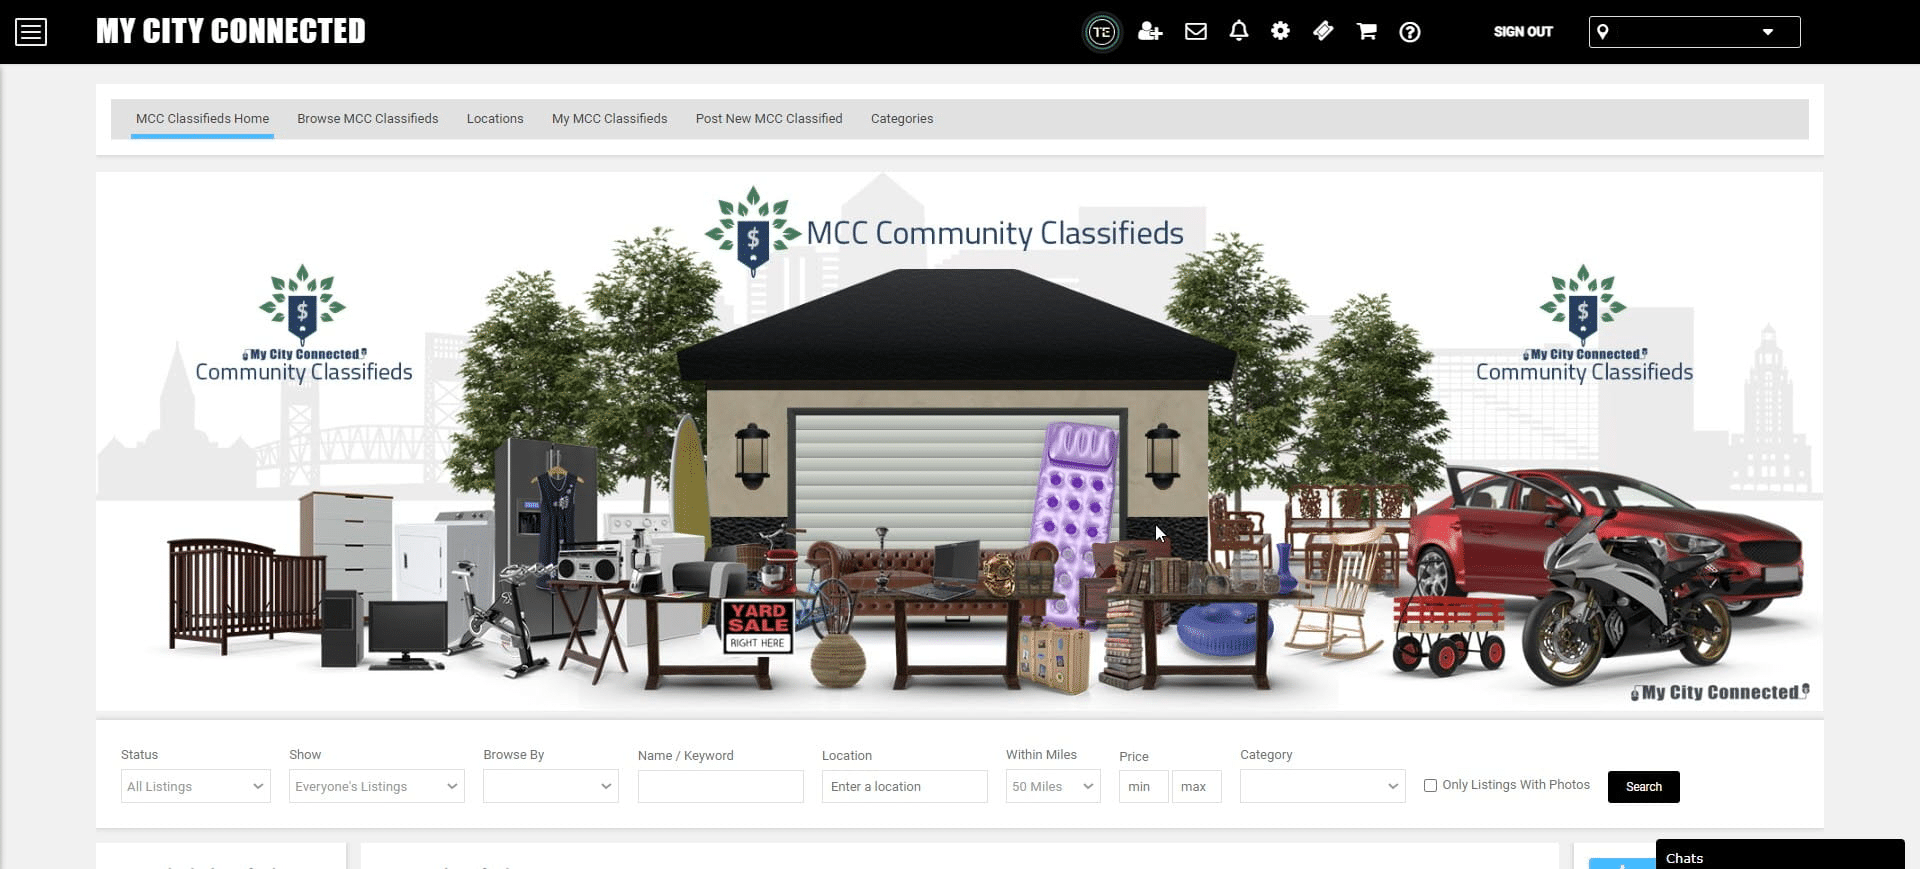 Welcome to the MCC Connumity Classifieds! This is what you will see on at the top of the Classifieds Home Page.